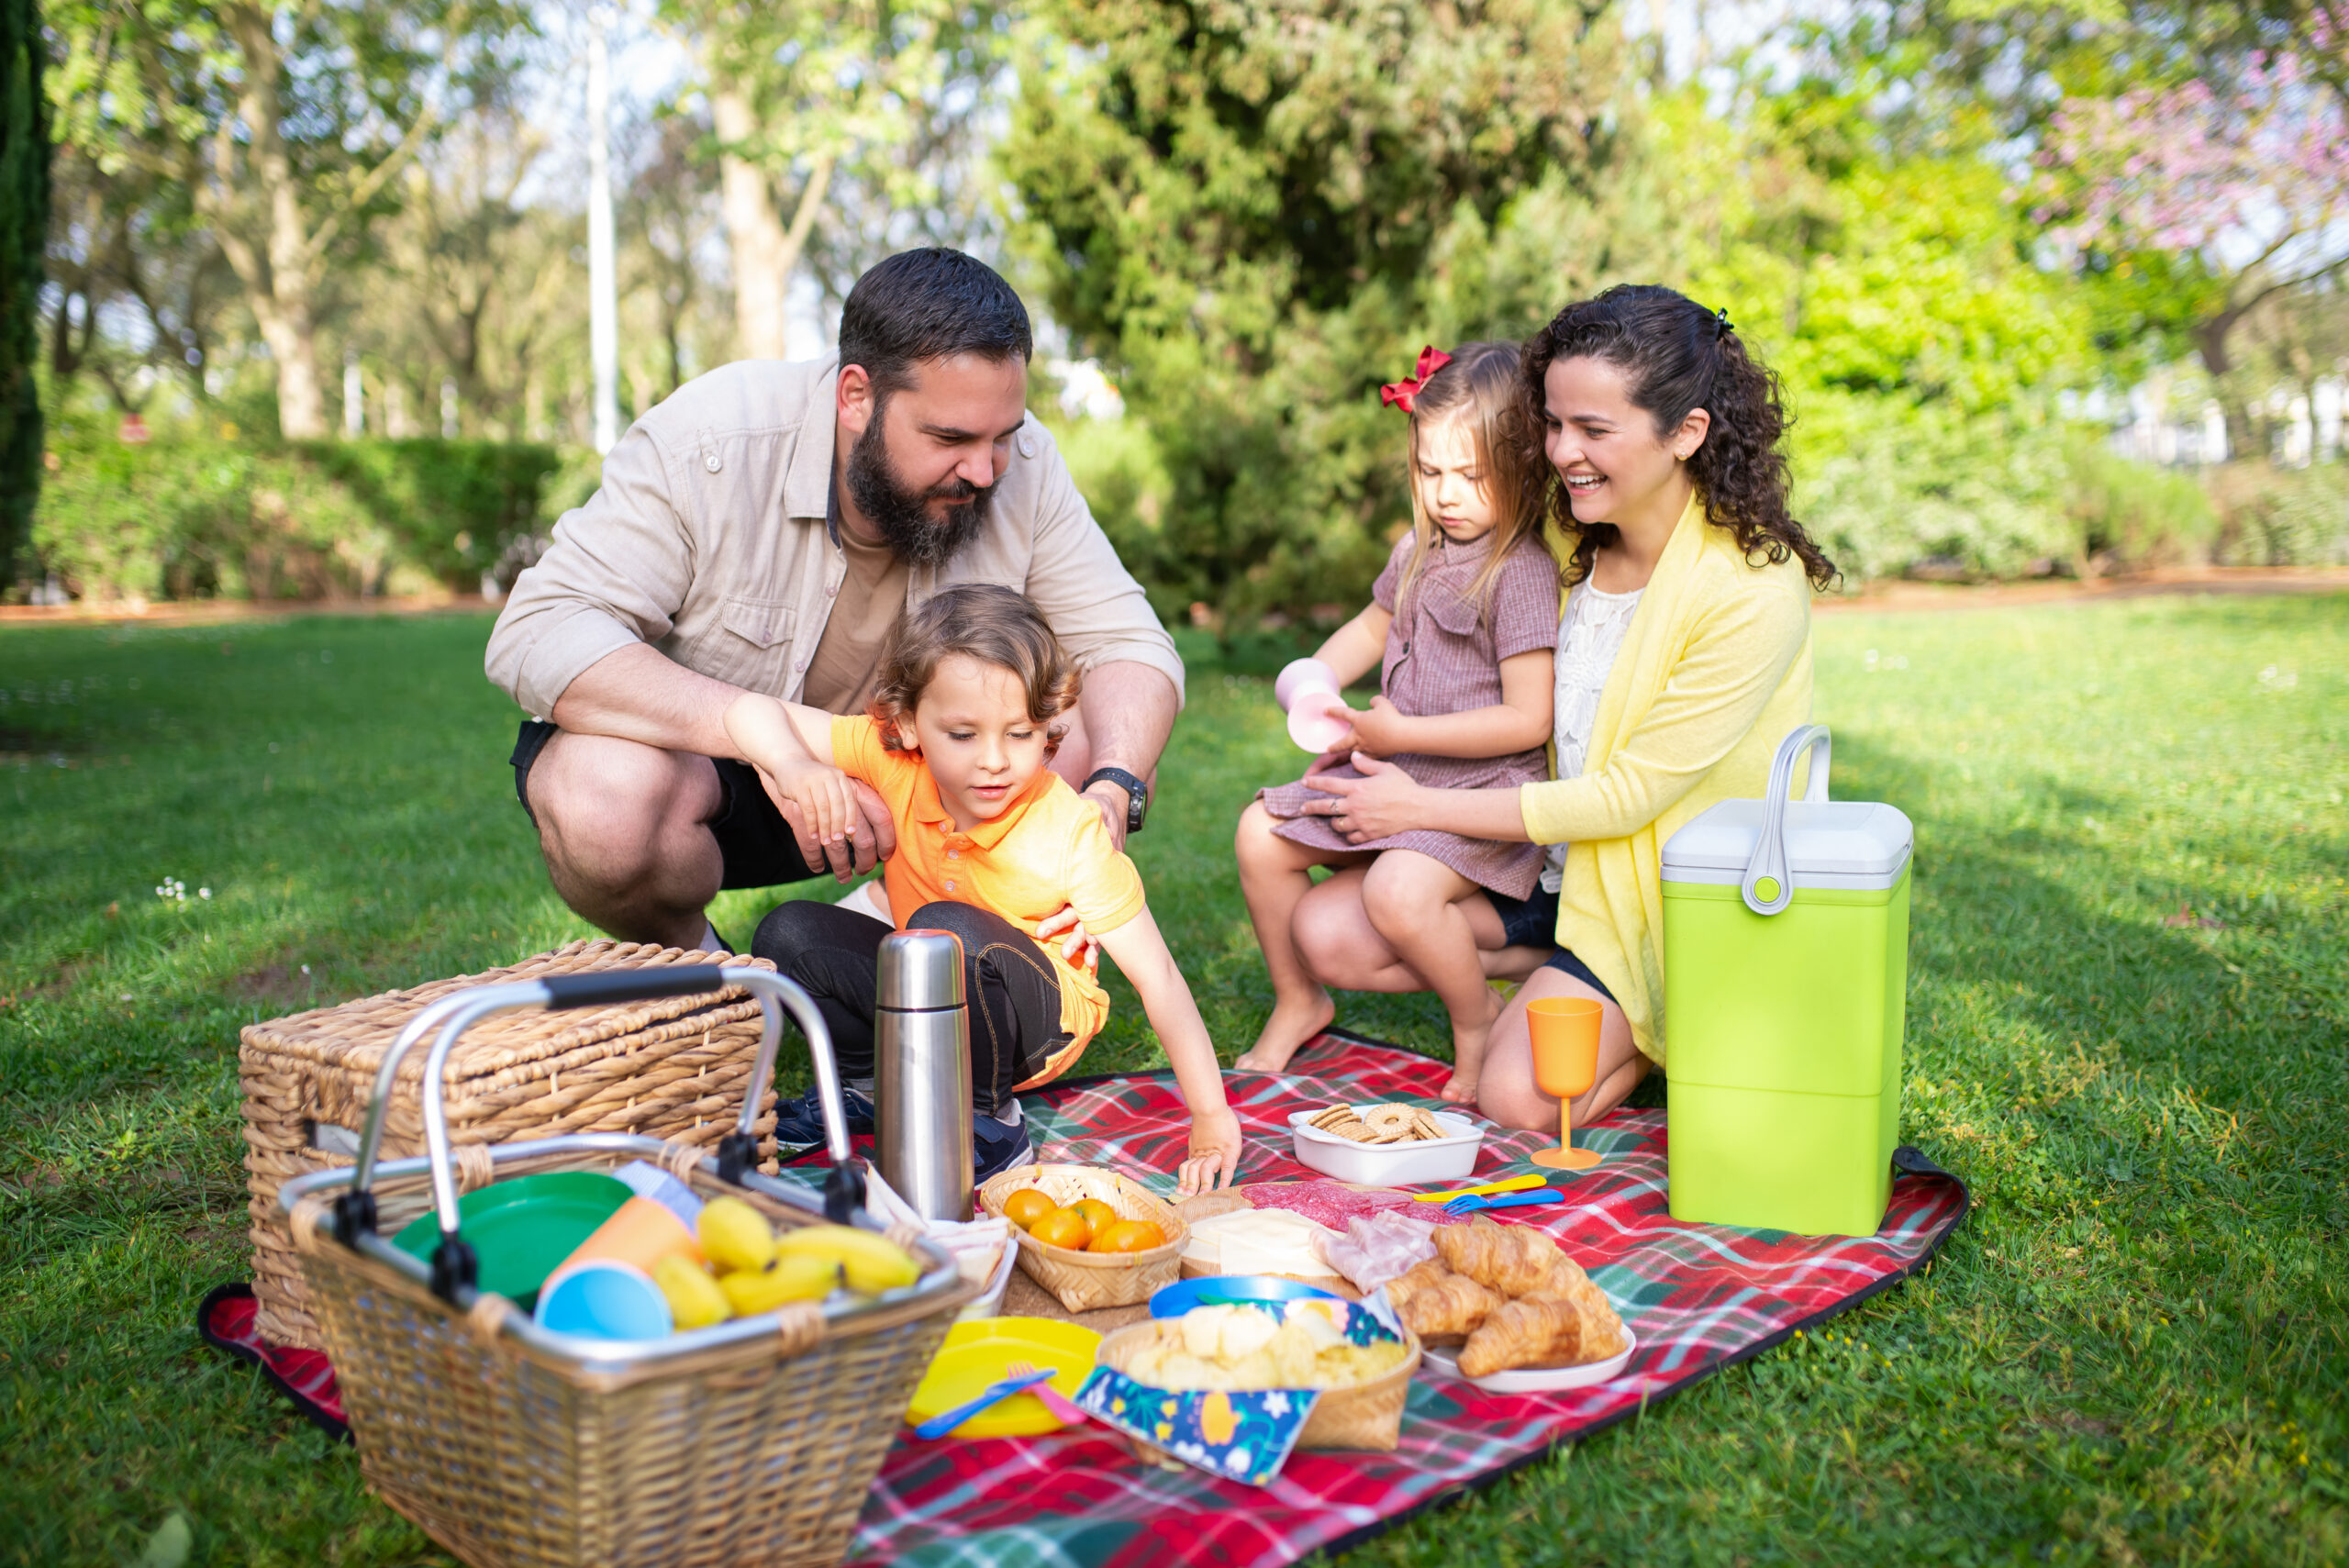 Why Picnicking with Your Kids is a Great Idea